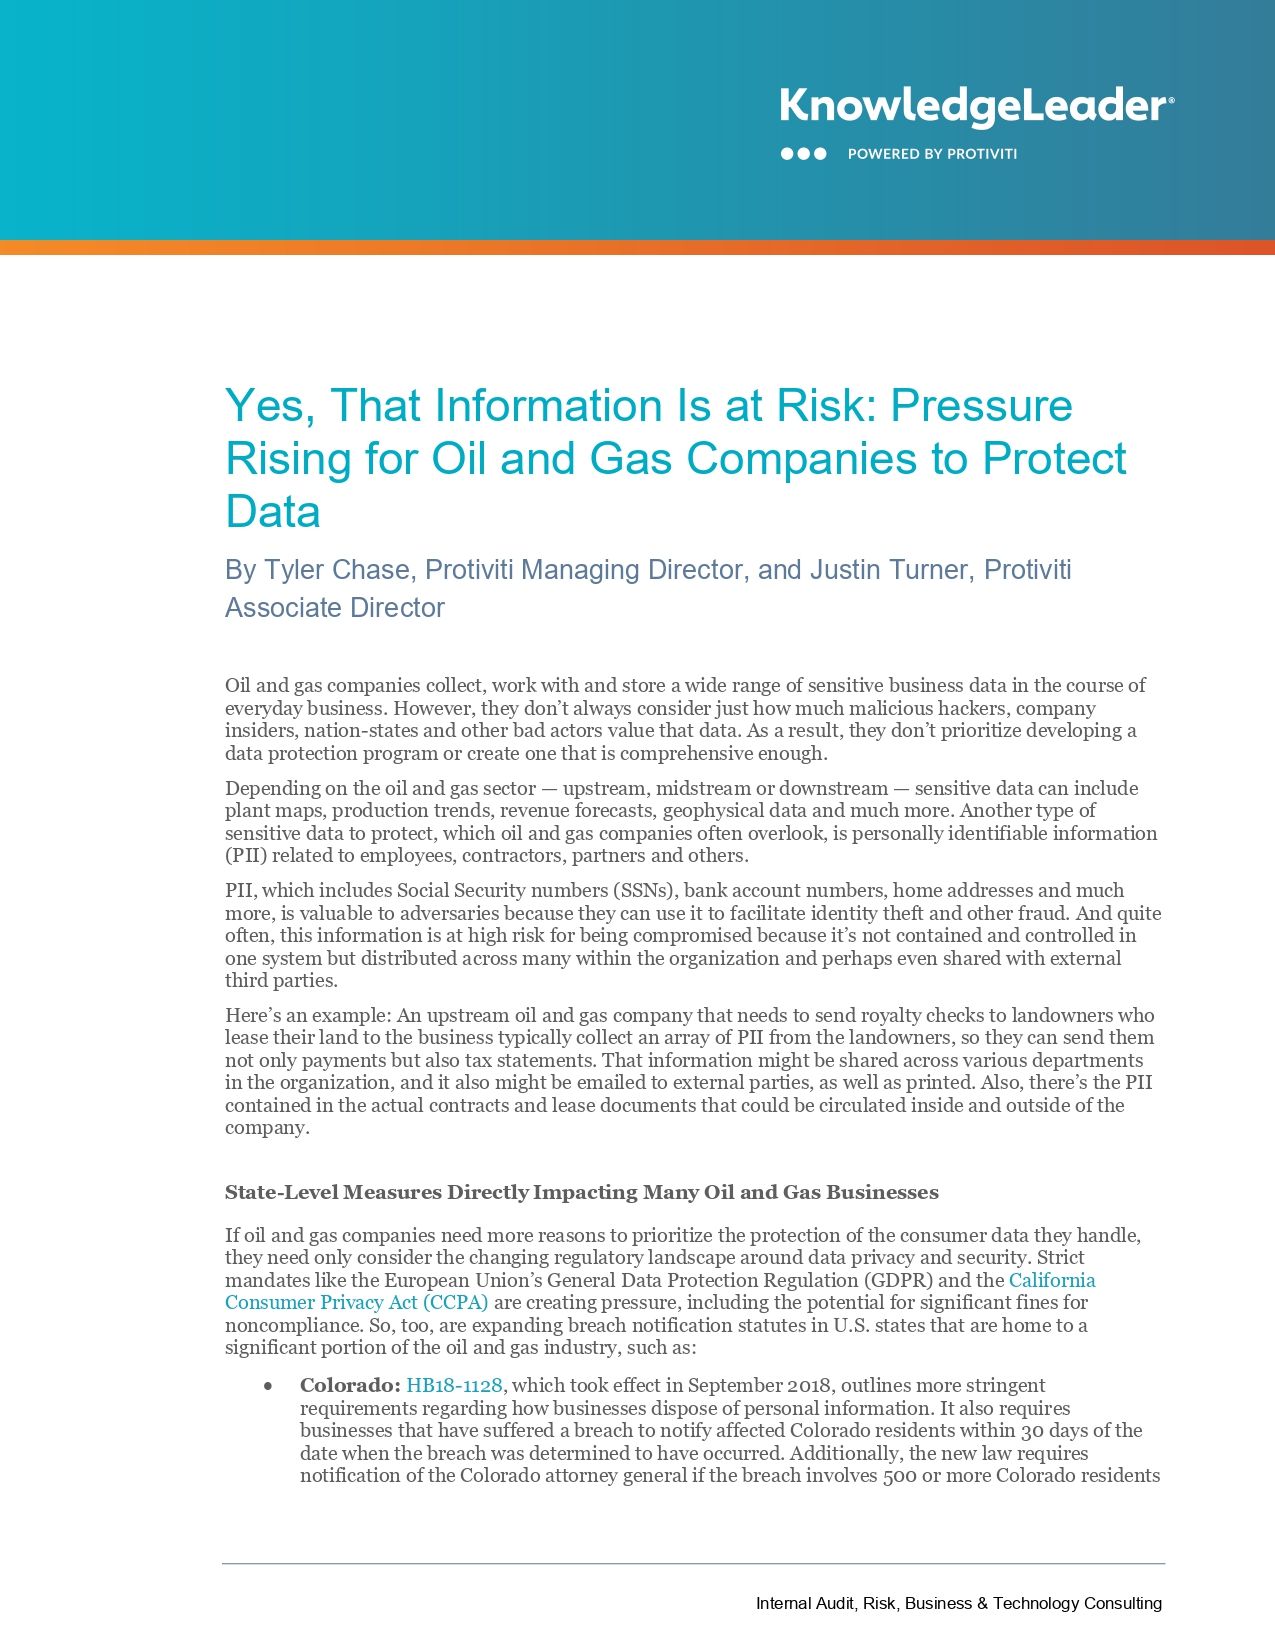 Yes, That Information Is at Risk: Pressure Rising for Oil and Gas Companies to Protect Data